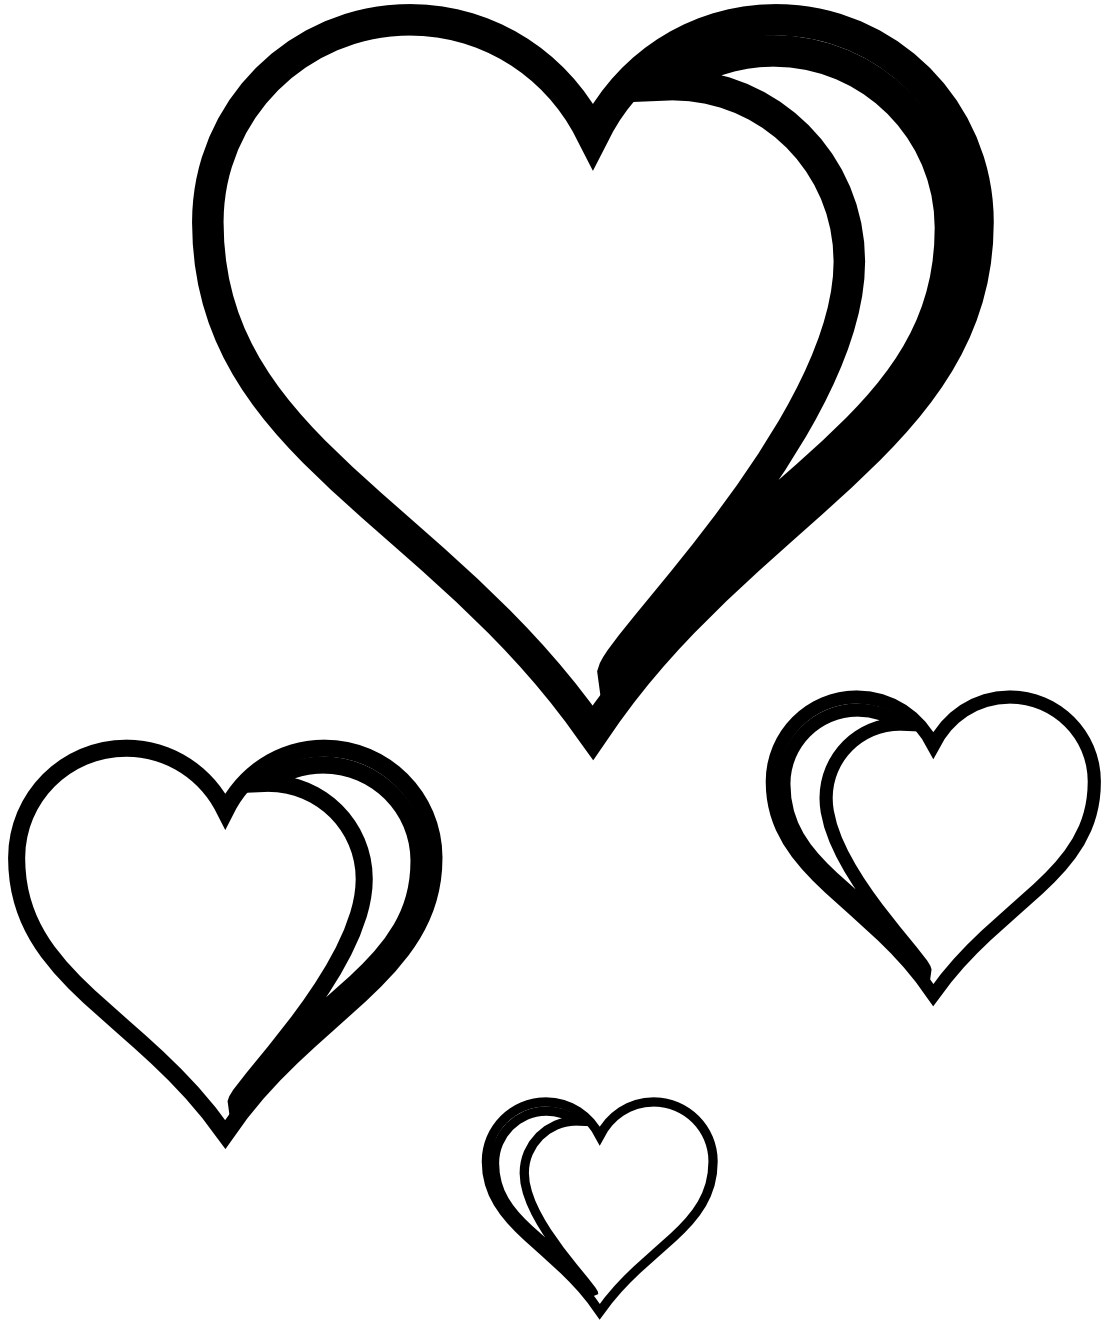 Heart clipart black and white png